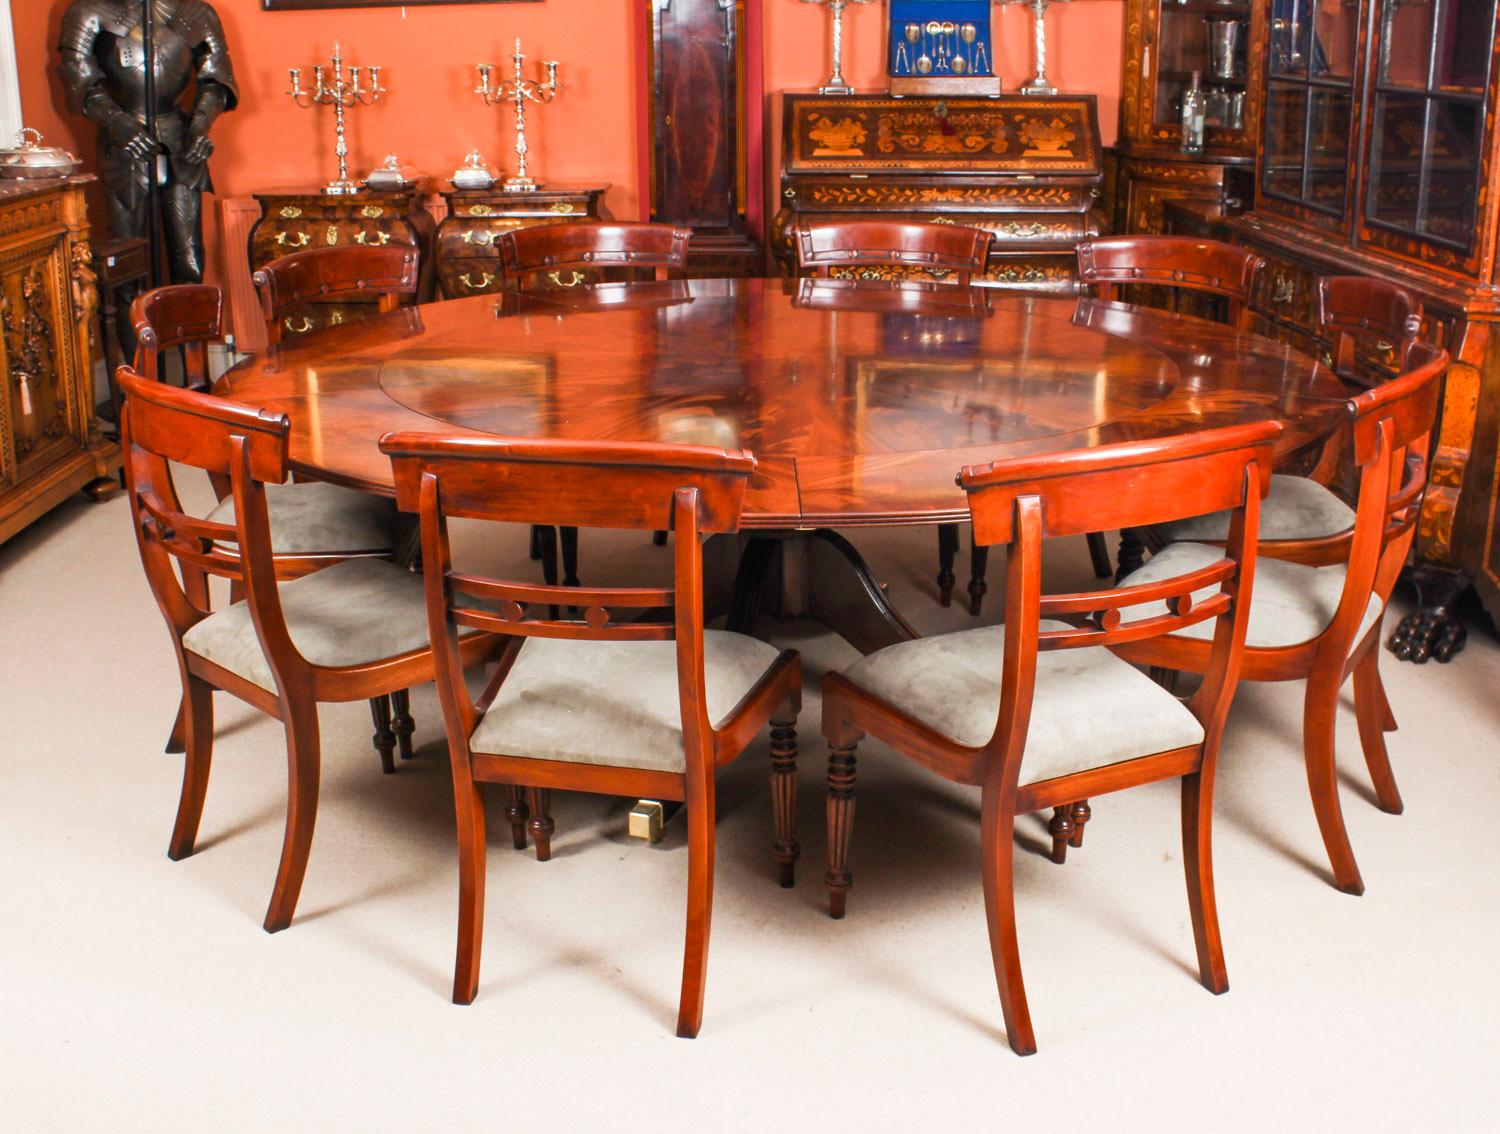 Regency Revival Vintage Flame Mahogany Jupe Dining Table, Mid-20th Century